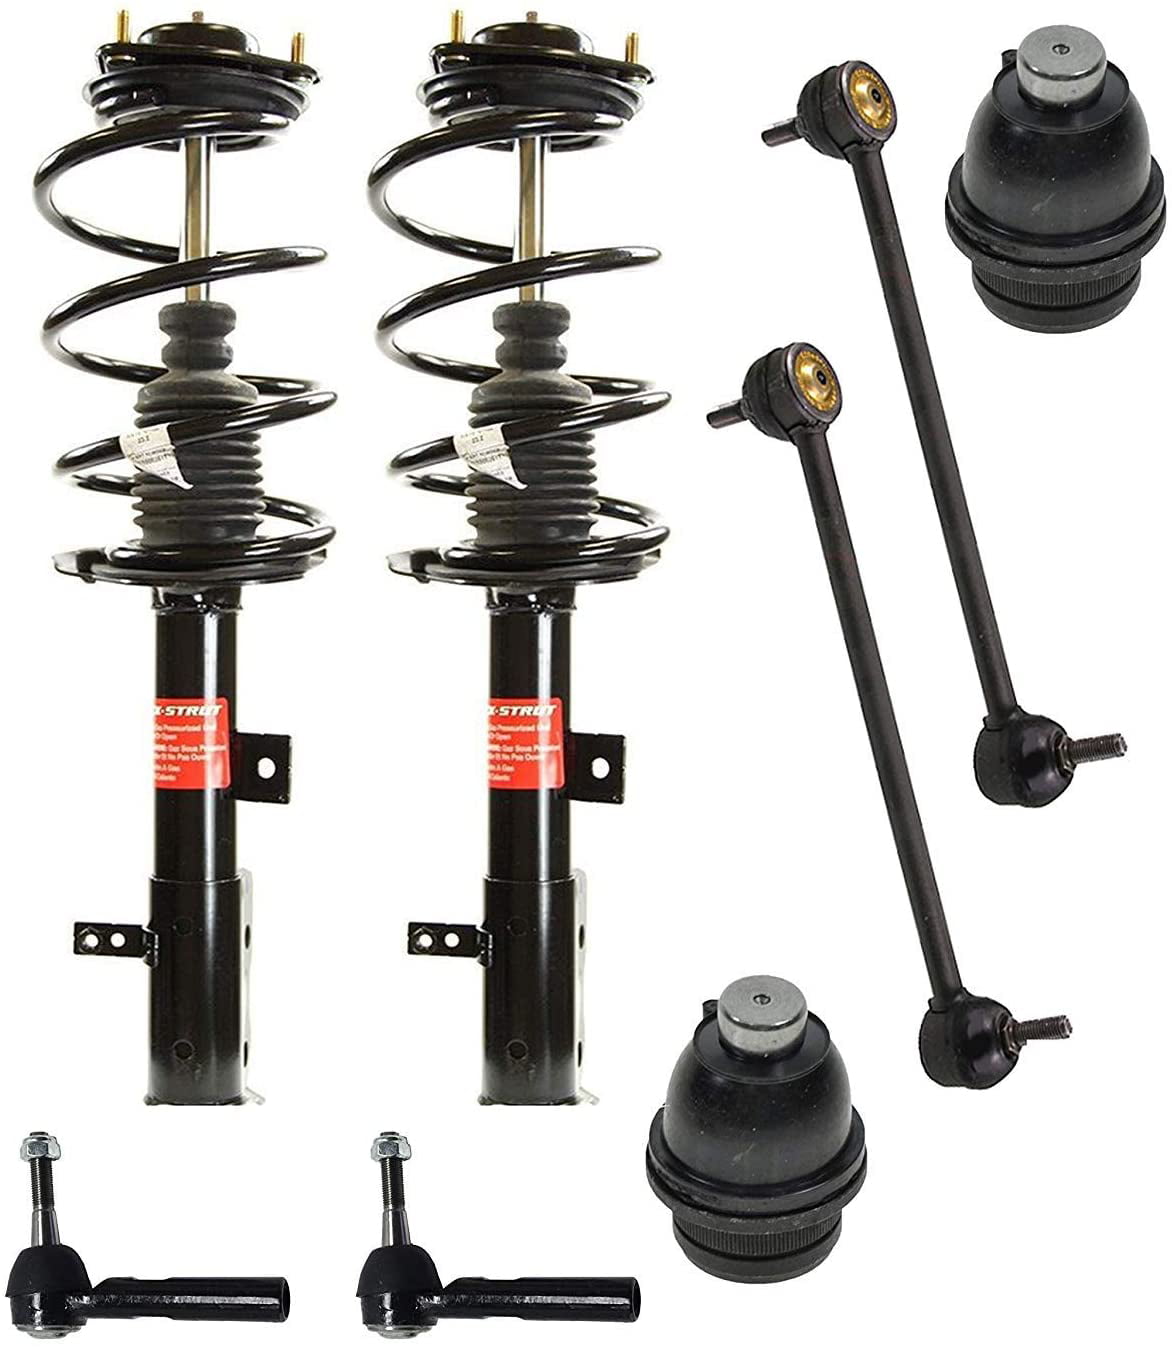 1x Fr Left Replacement Gas Pressure Strut OE Quality Suspension Shock Absorber